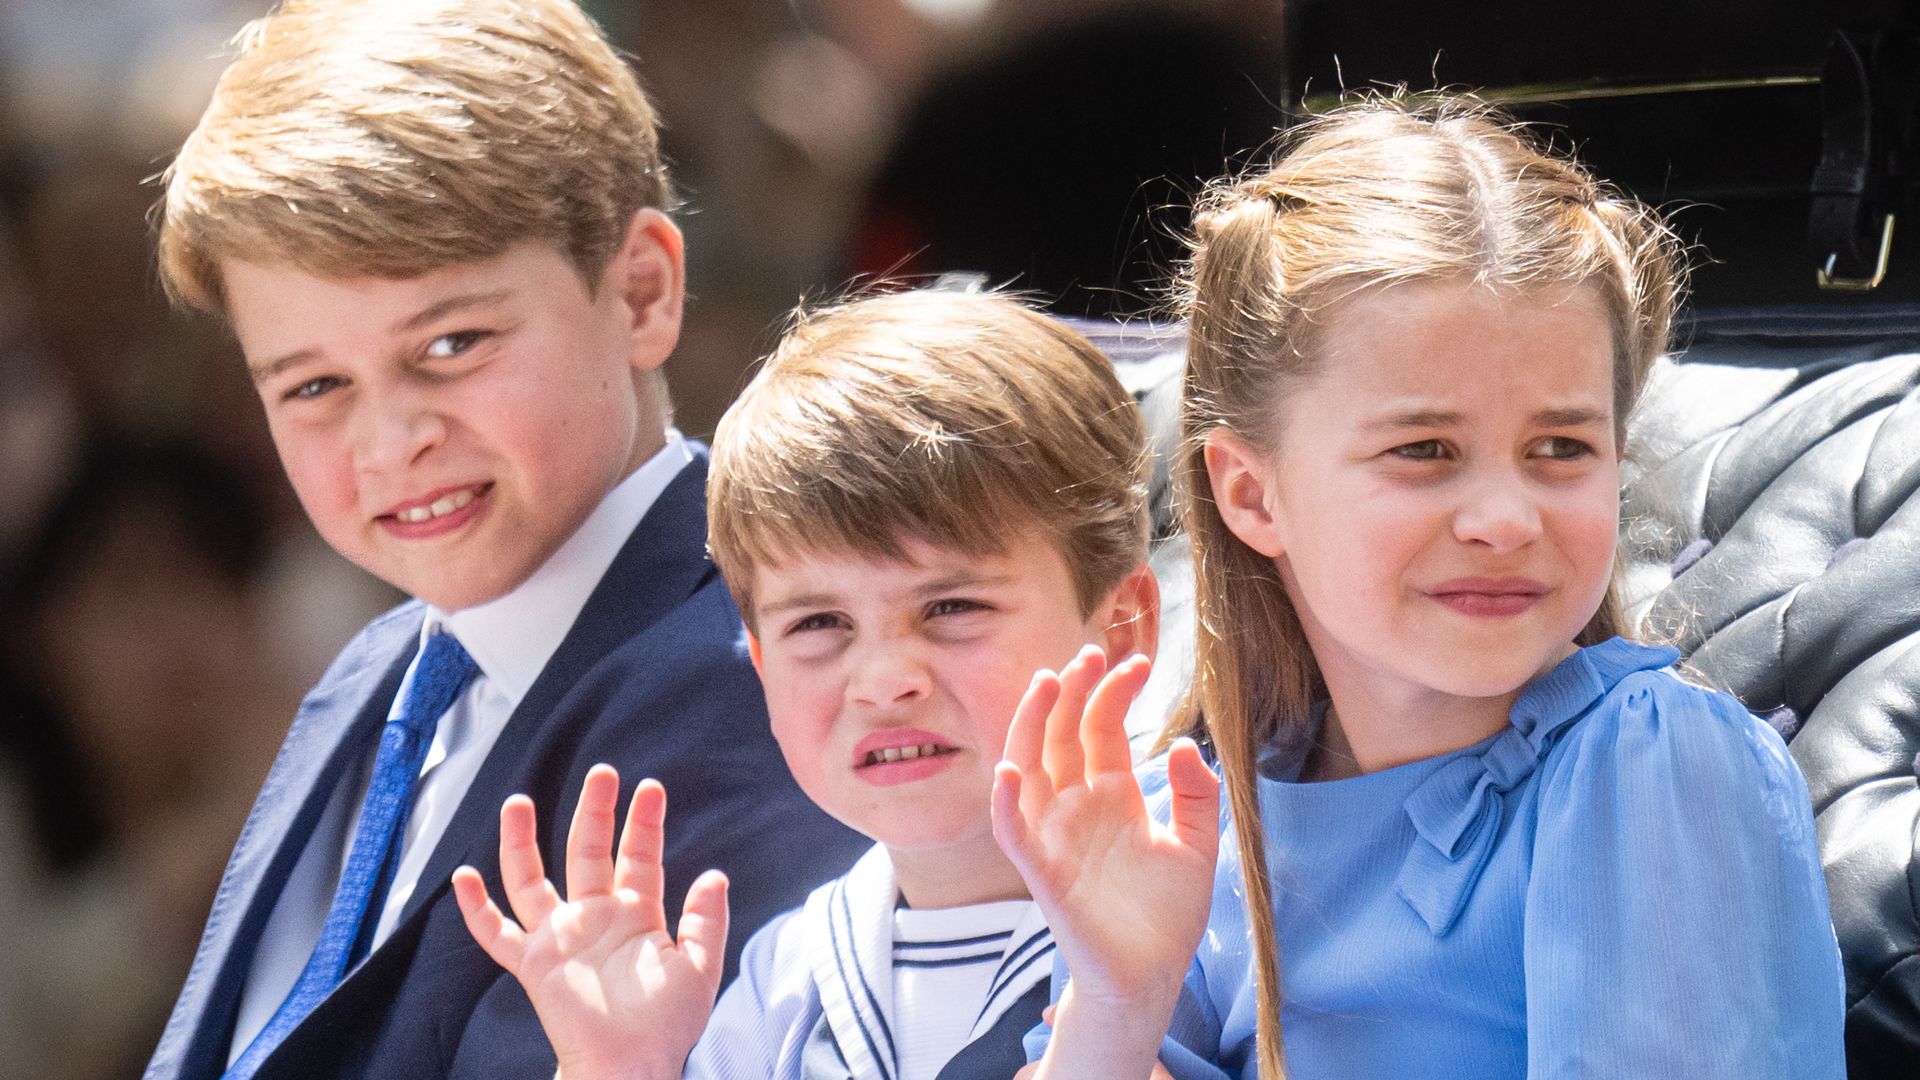 Prince George of Wales, Prince Louis of Wales and Princess Charlotte of Wales ride in a carriage during Trooping The Colour, the Queen's annual birthday parade, on June 02, 2022 in London, England.